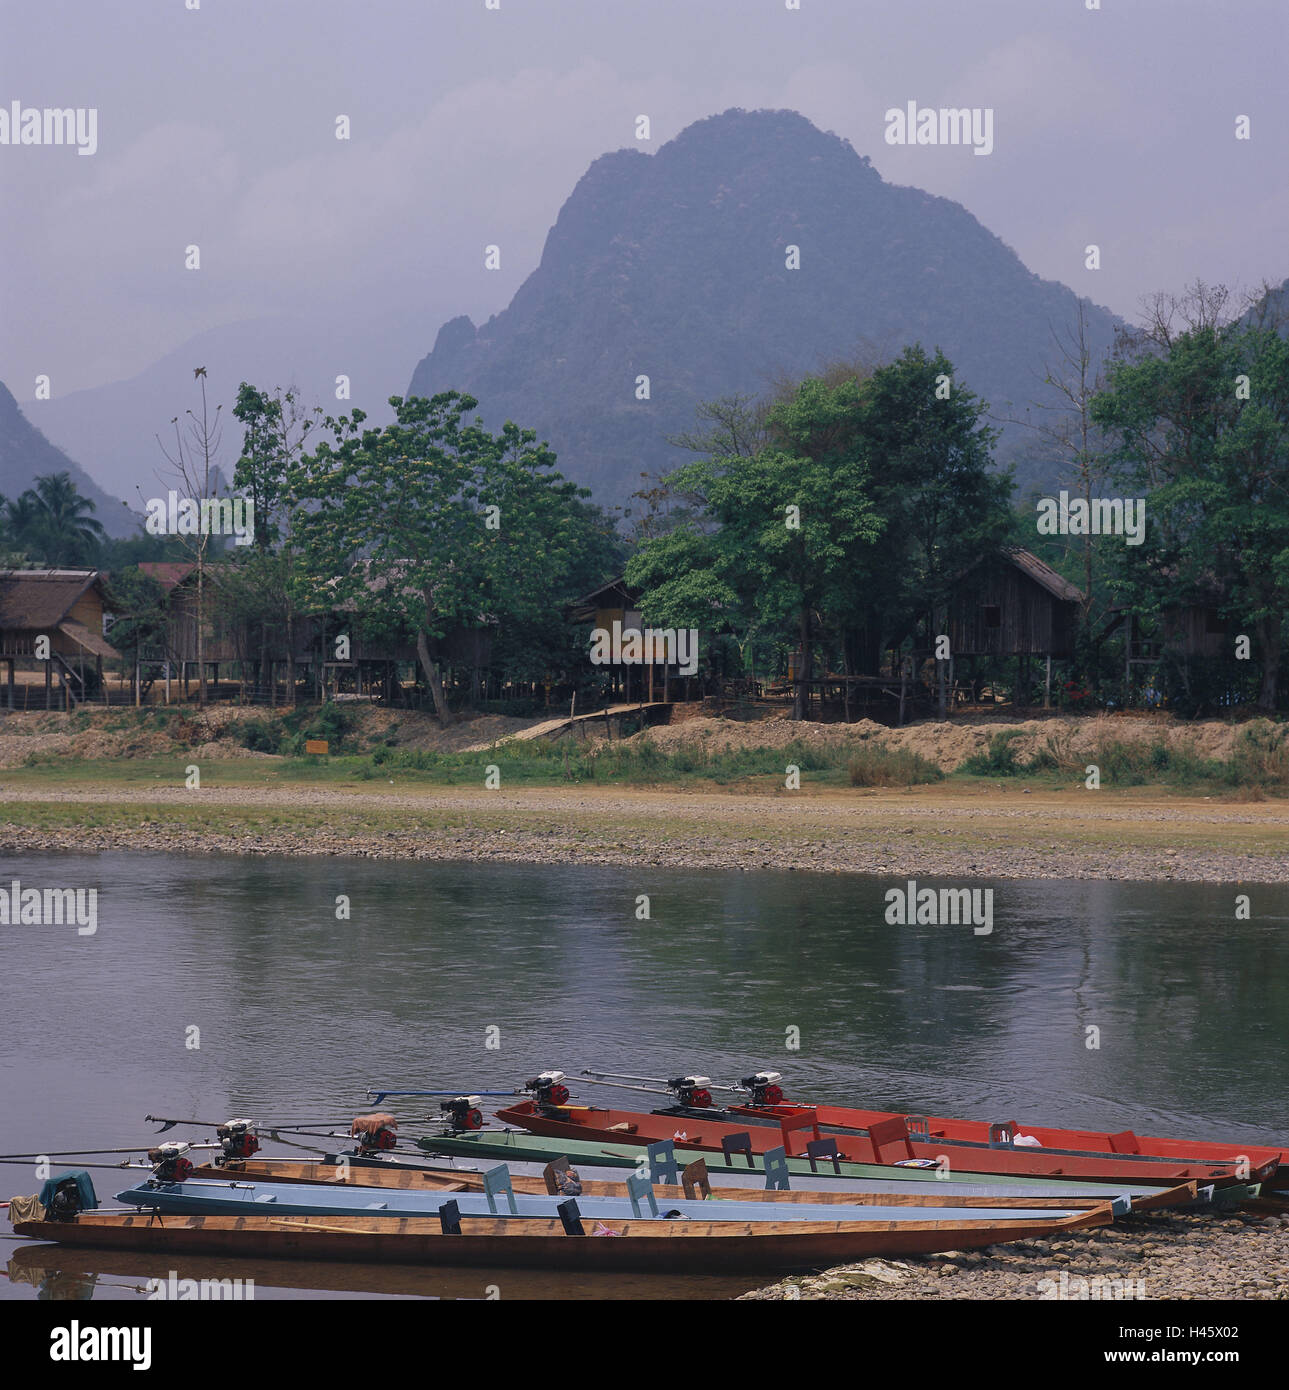 Laos, Vang Vieng, river Nam Song, shore, boots, Asia, South-East Asia, destination, tourism, background, mountains, limestone rocks, riversides, wooden boots, hut, houses, building on stilts, trees, Stock Photo